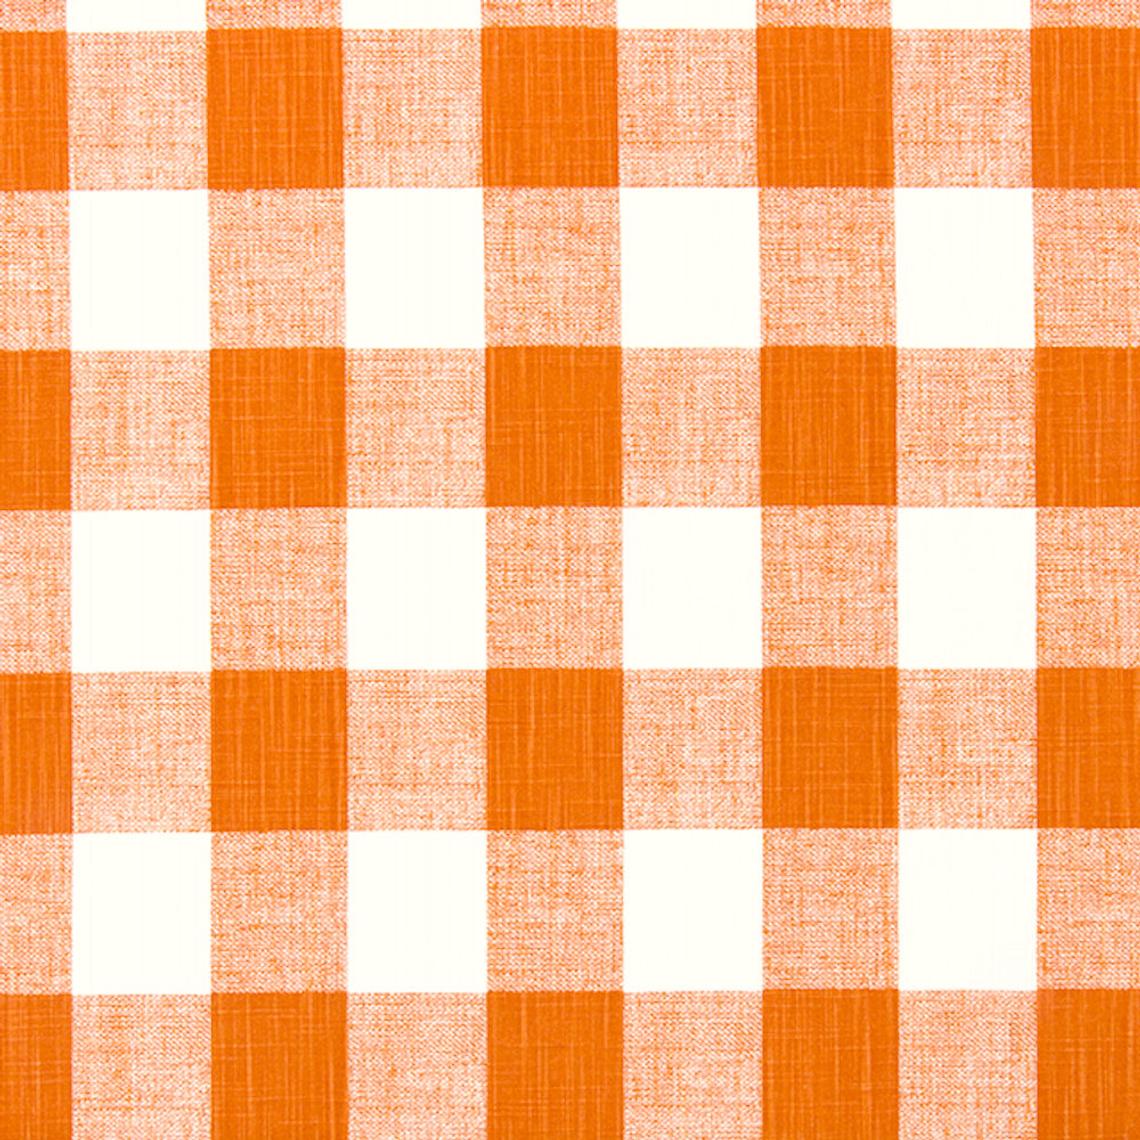 tailored tier cafe curtain panels pair in anderson monarch orange buffalo check plaid